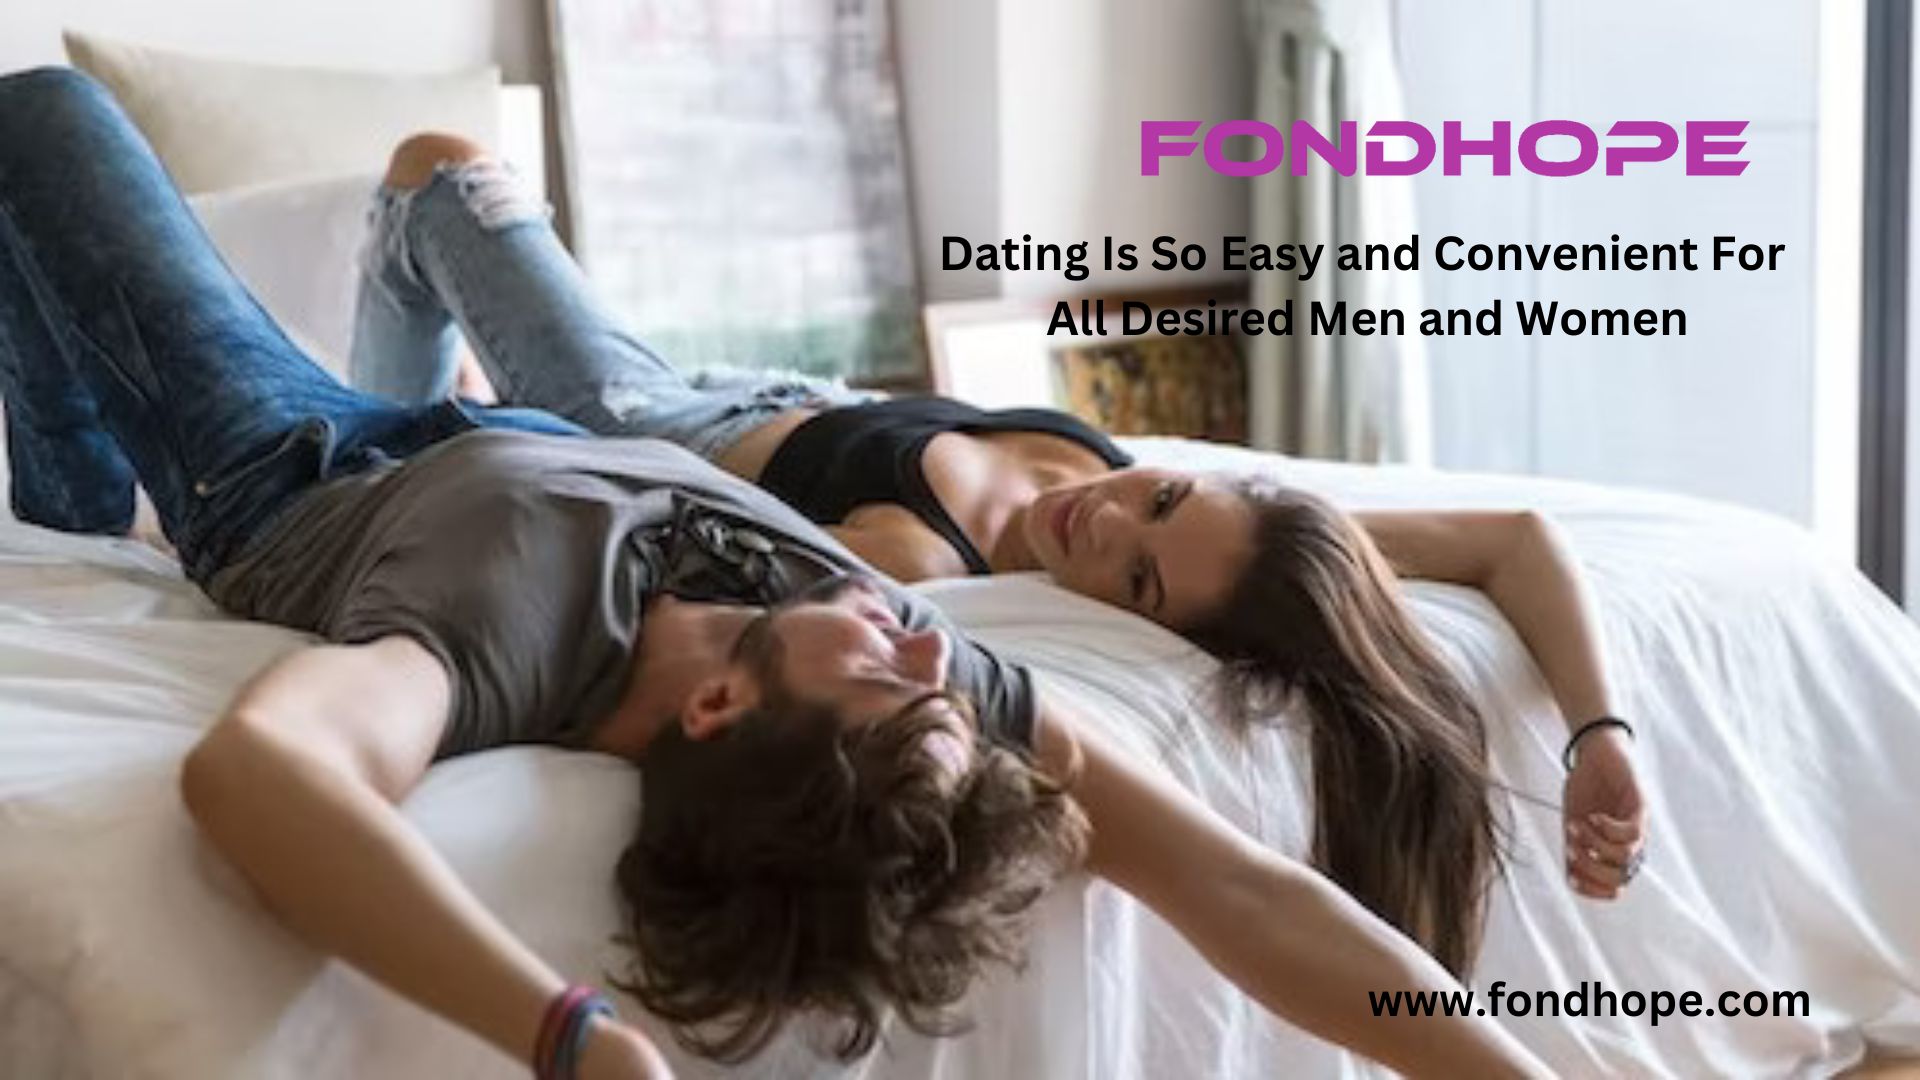 Dating Is So Easy and Convenient For All Desired Men and Women